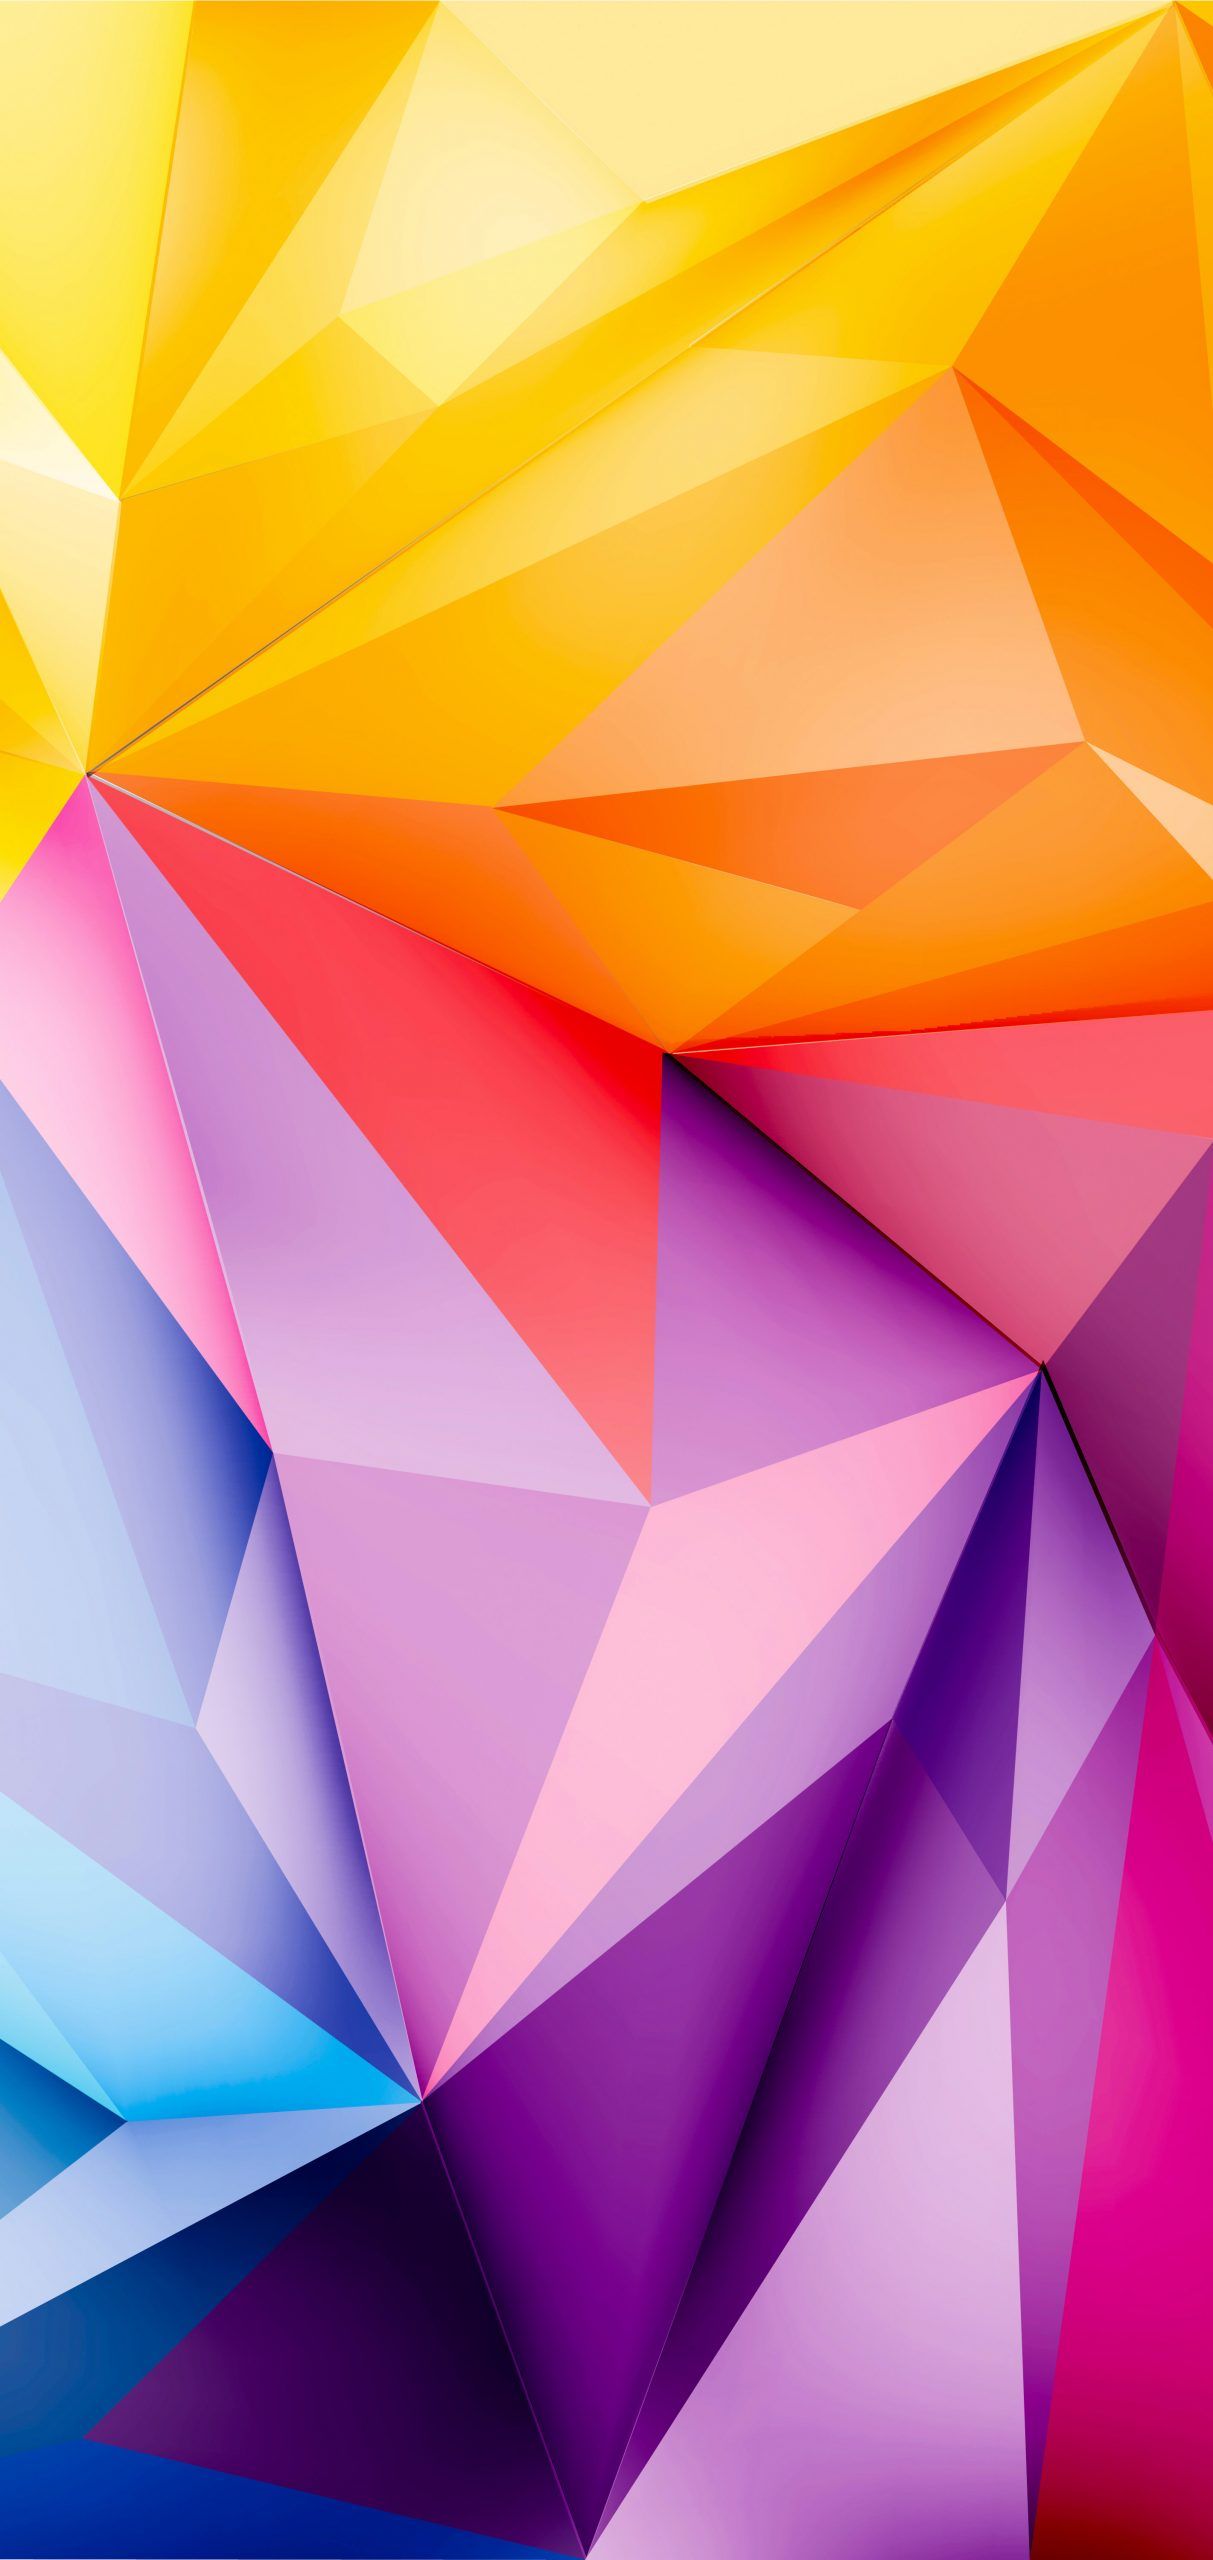 Abstract geometry wallpaper bring color and gradients to iPhone